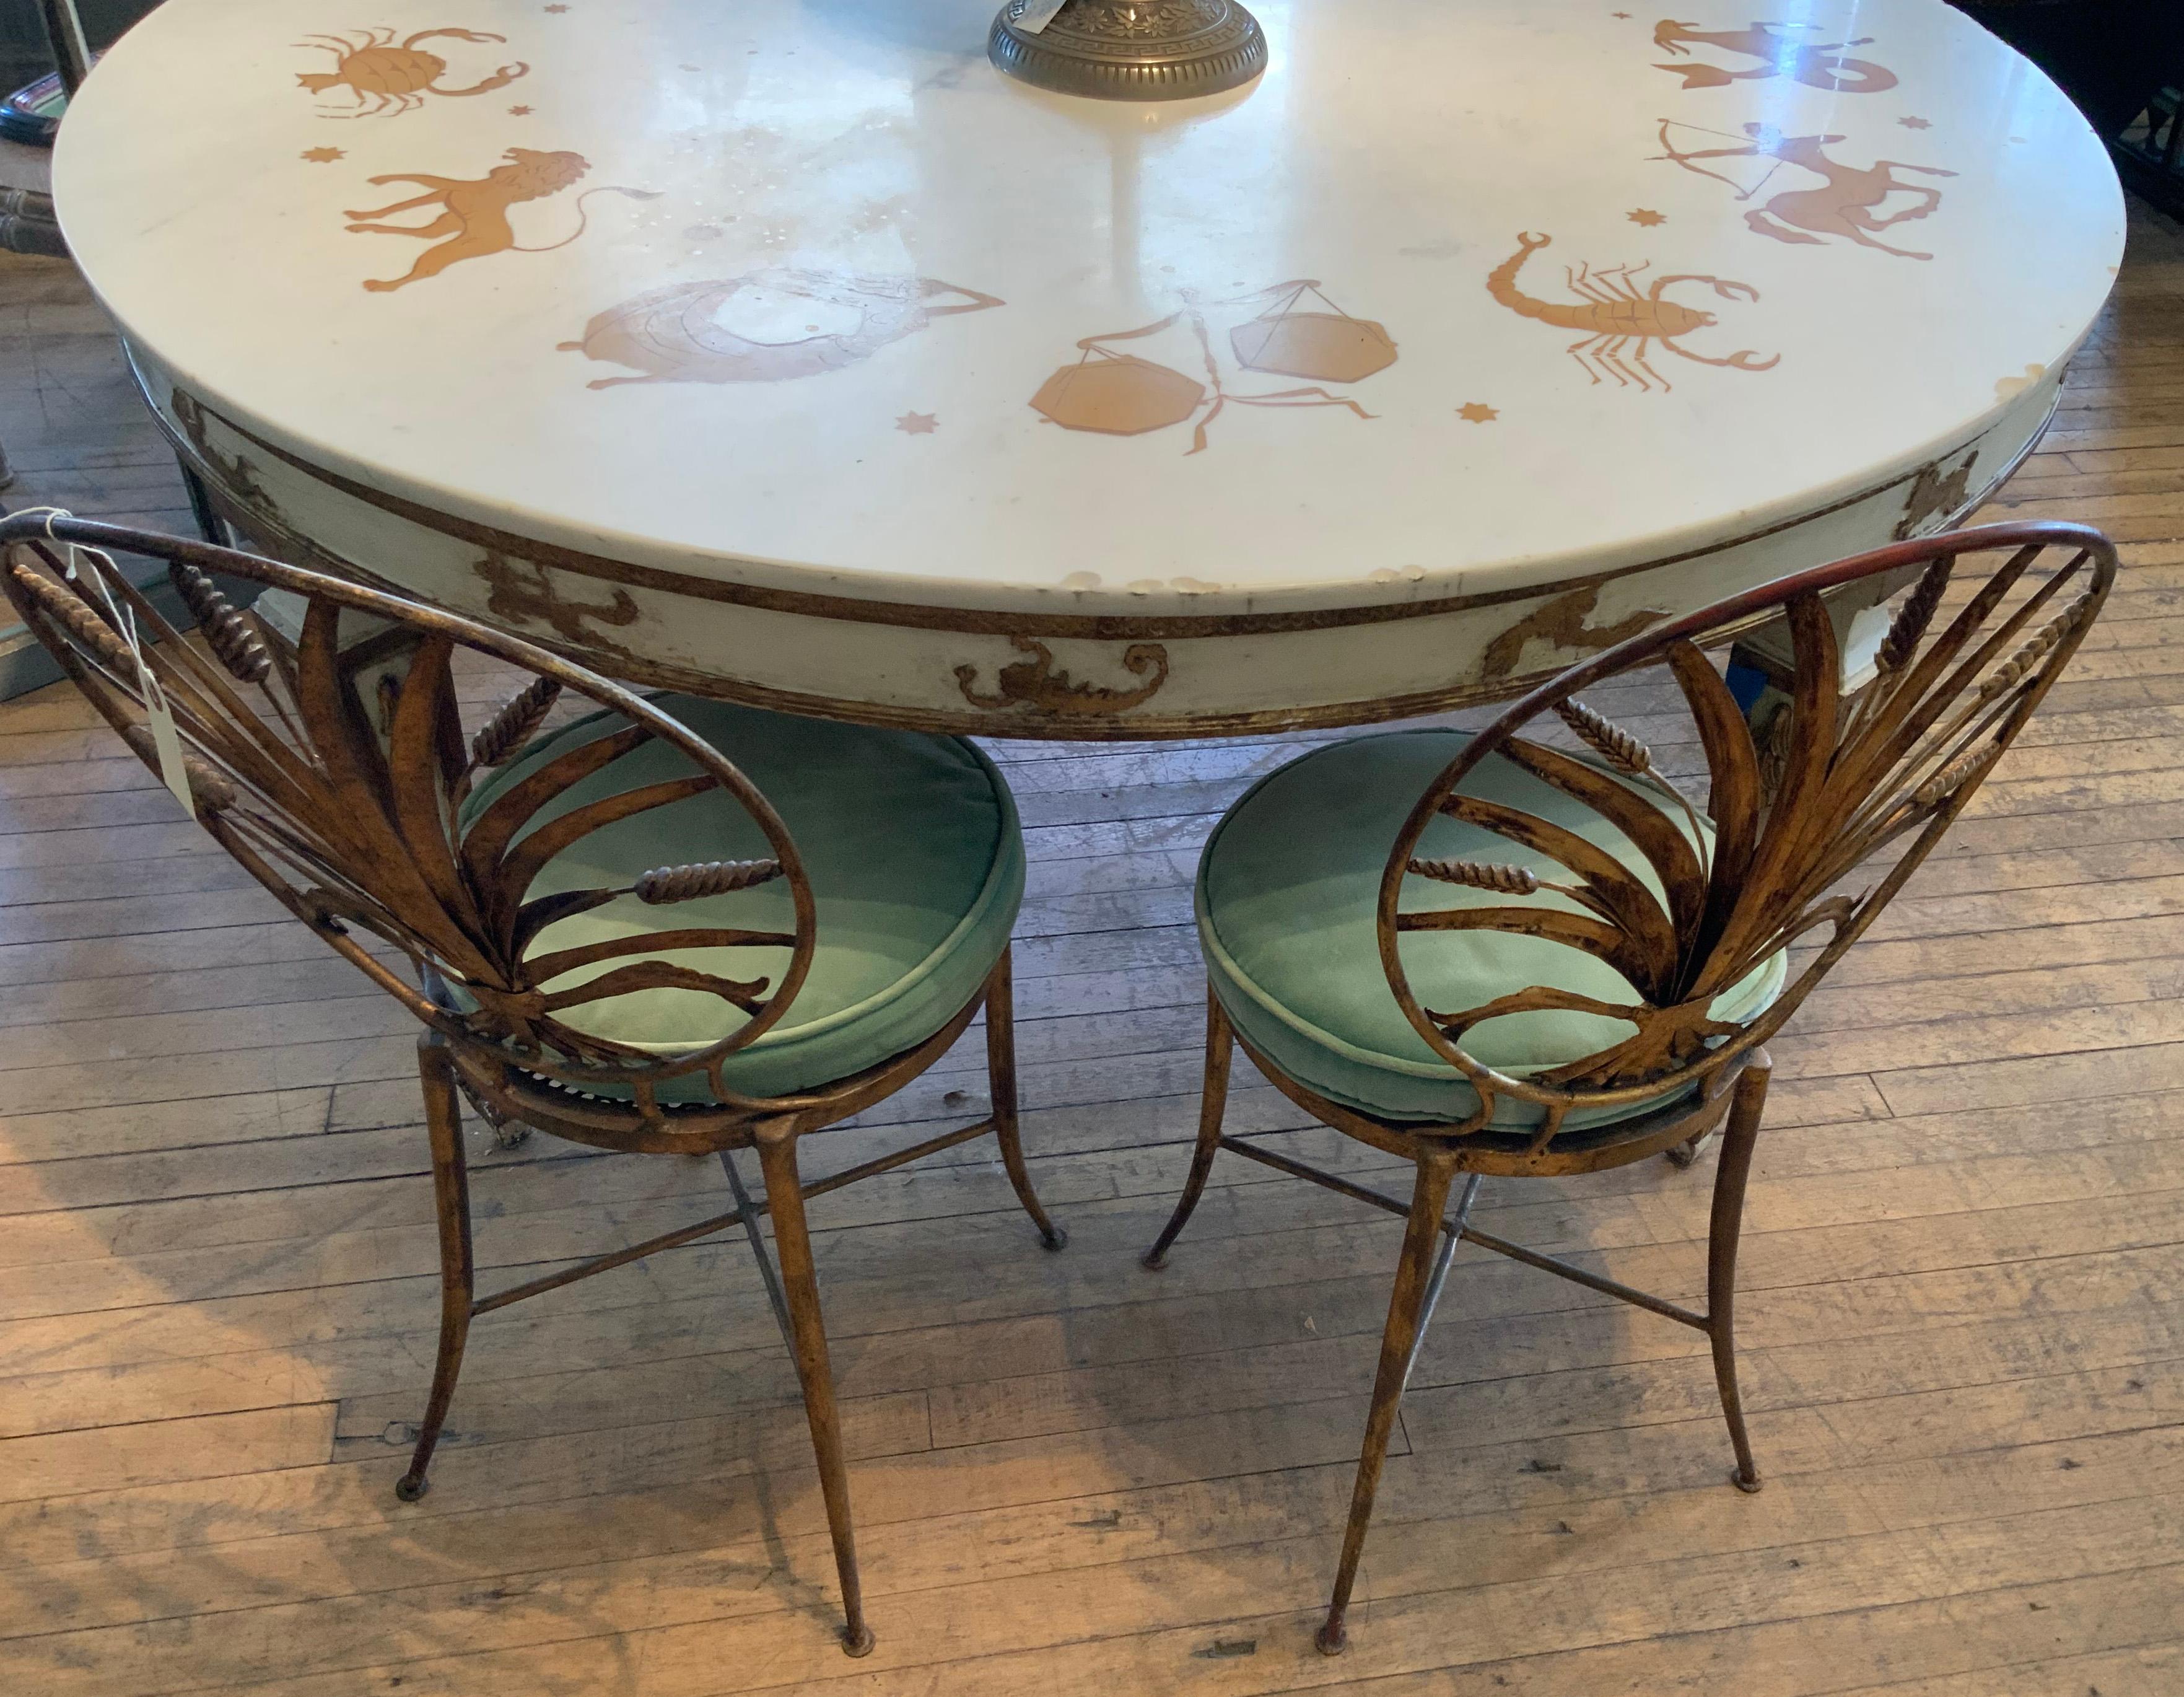 Vintage Italian Marble Dining Table with Inlaid Zodiac Signs 7